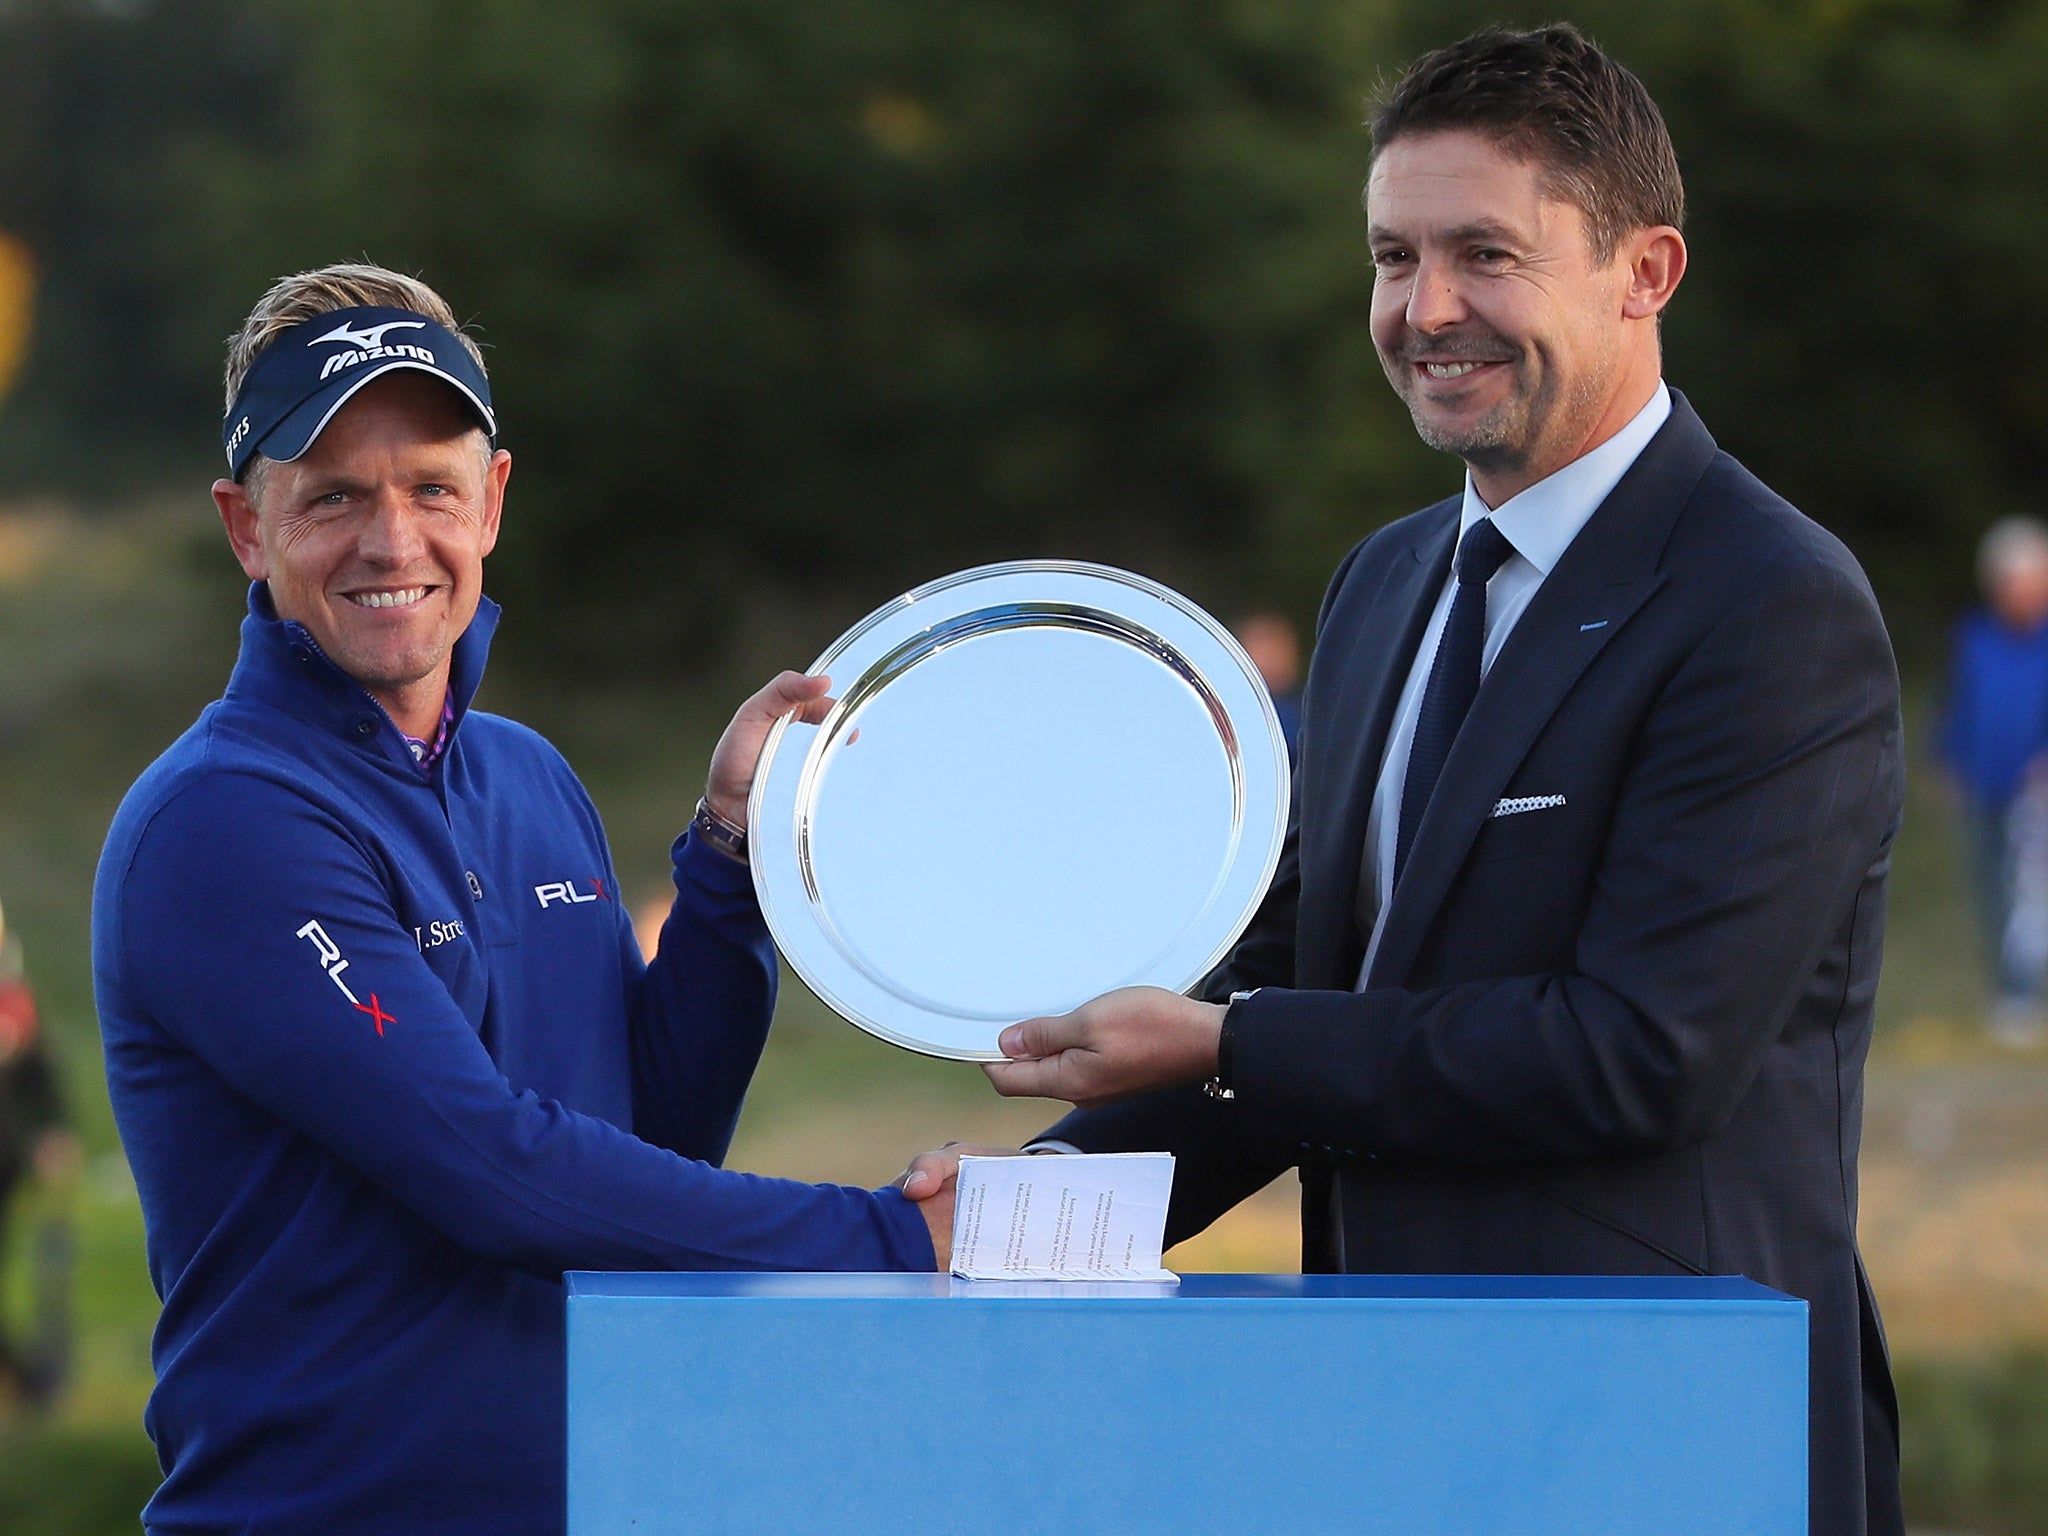 Luke Donald is presented with a trophy after hosting the British Masters at The Grove